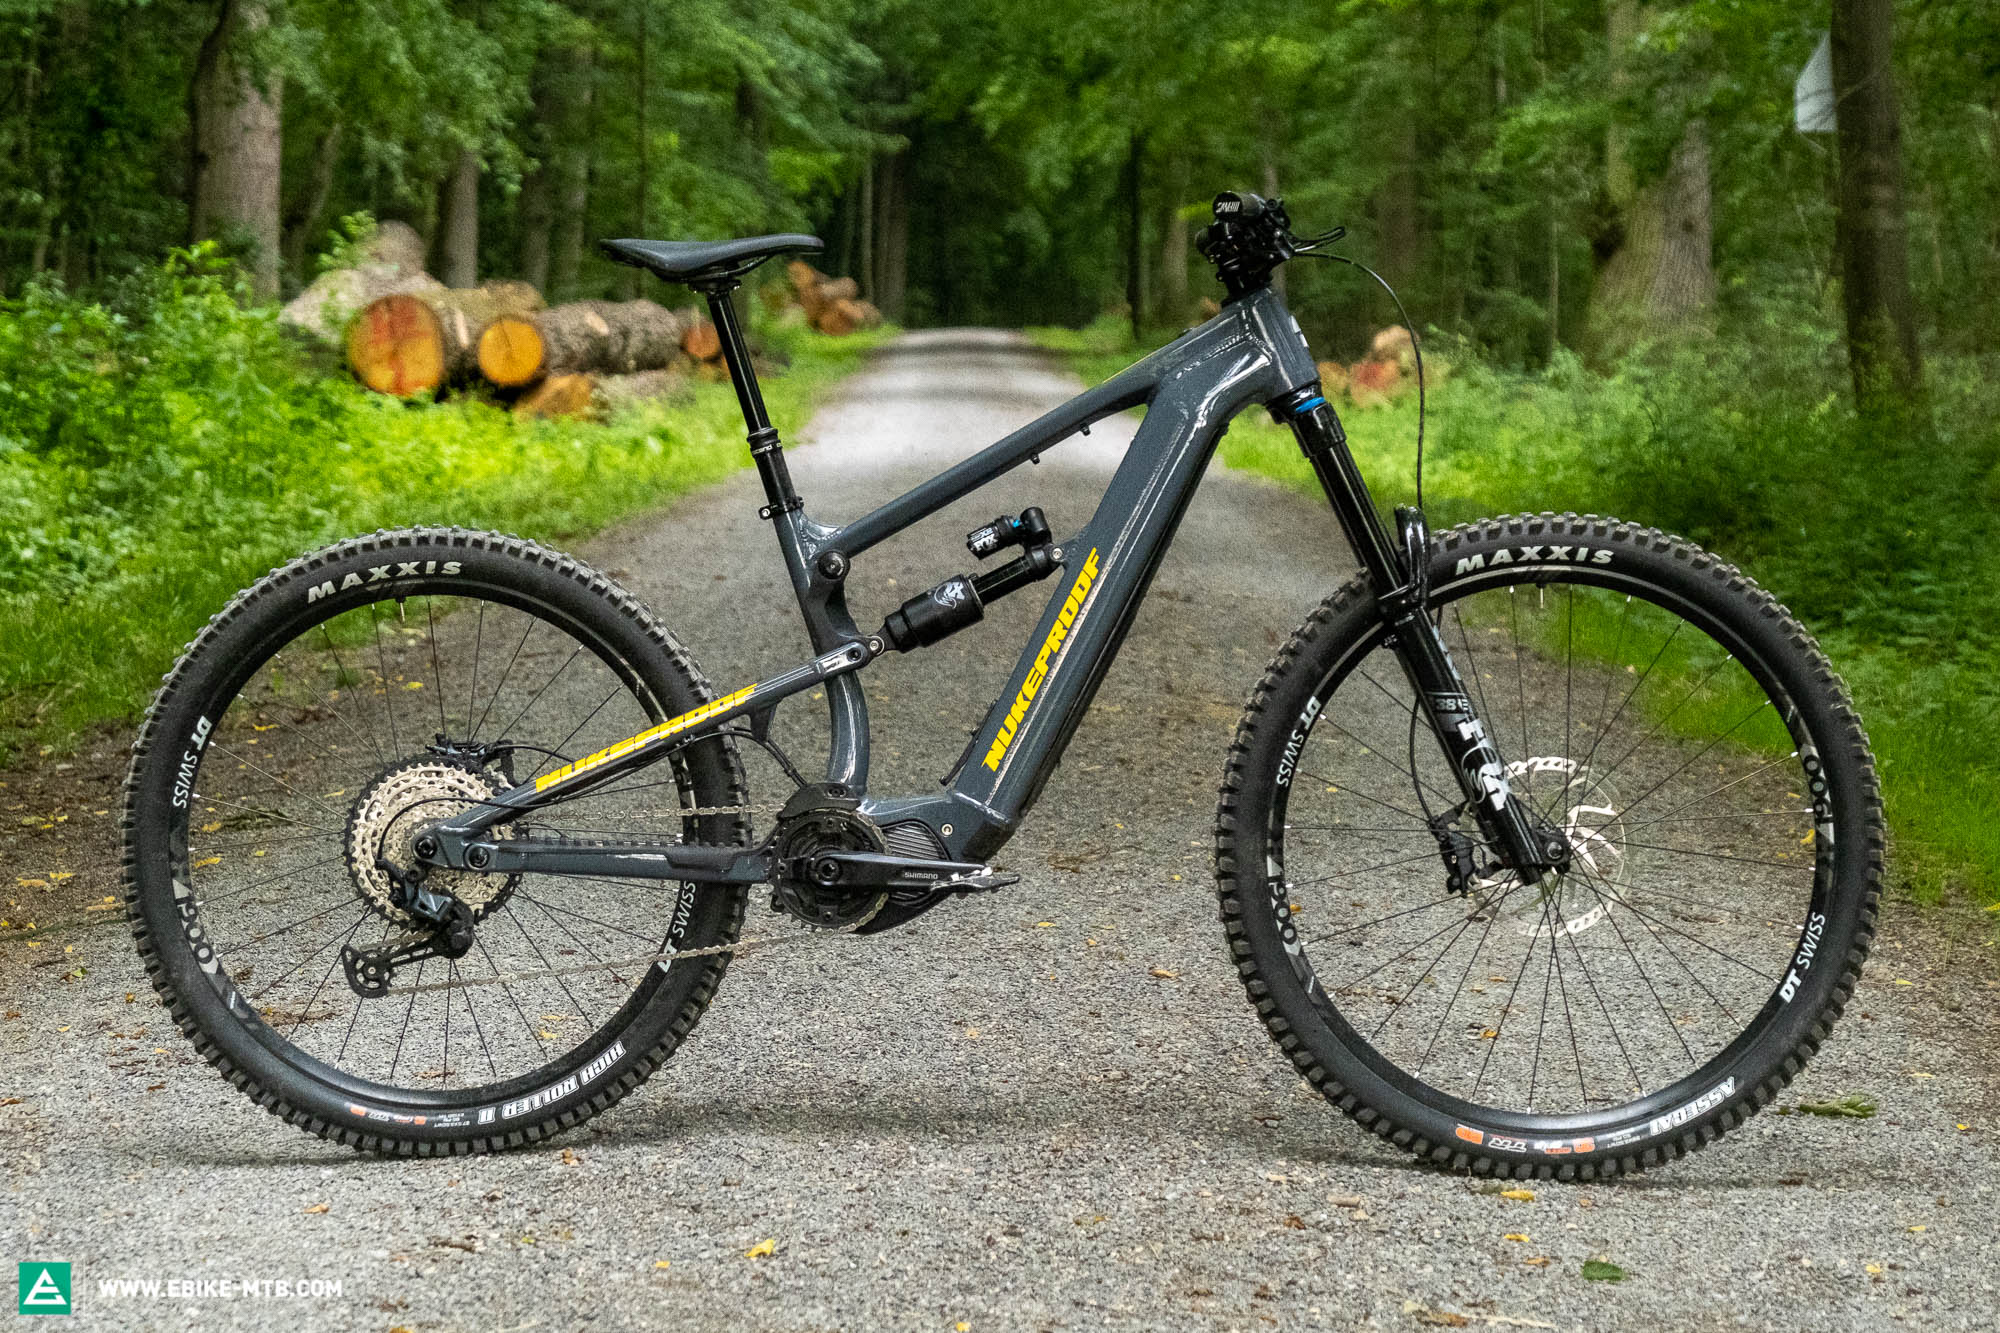 First ride review: the new Nukeproof Megawatt 297 Elite Alloy